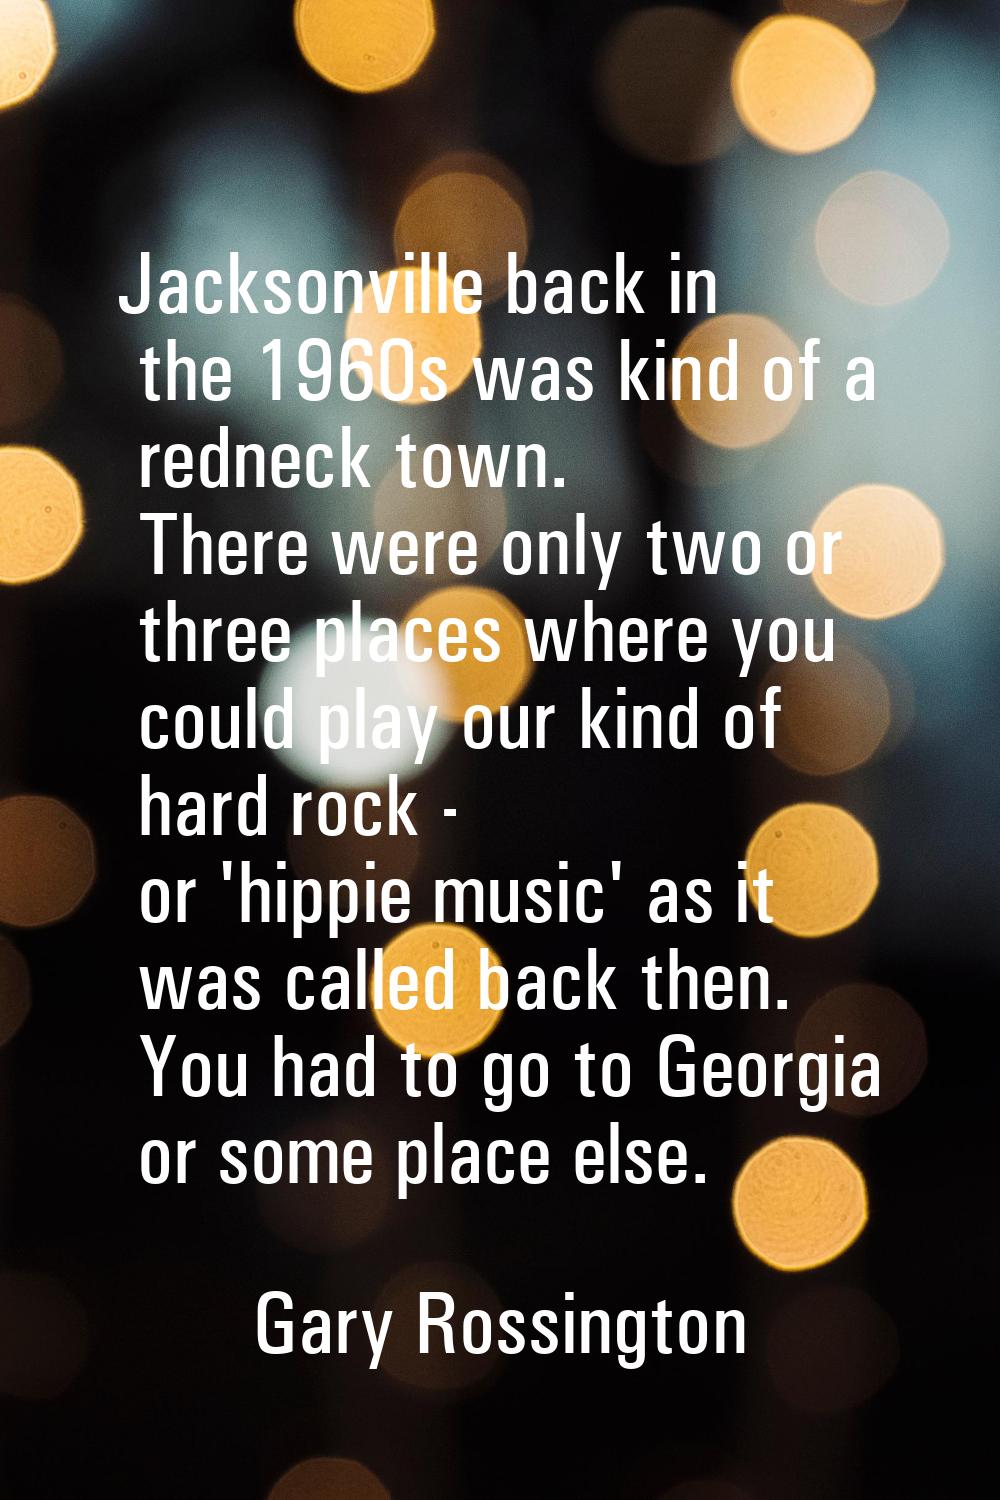 Jacksonville back in the 1960s was kind of a redneck town. There were only two or three places wher